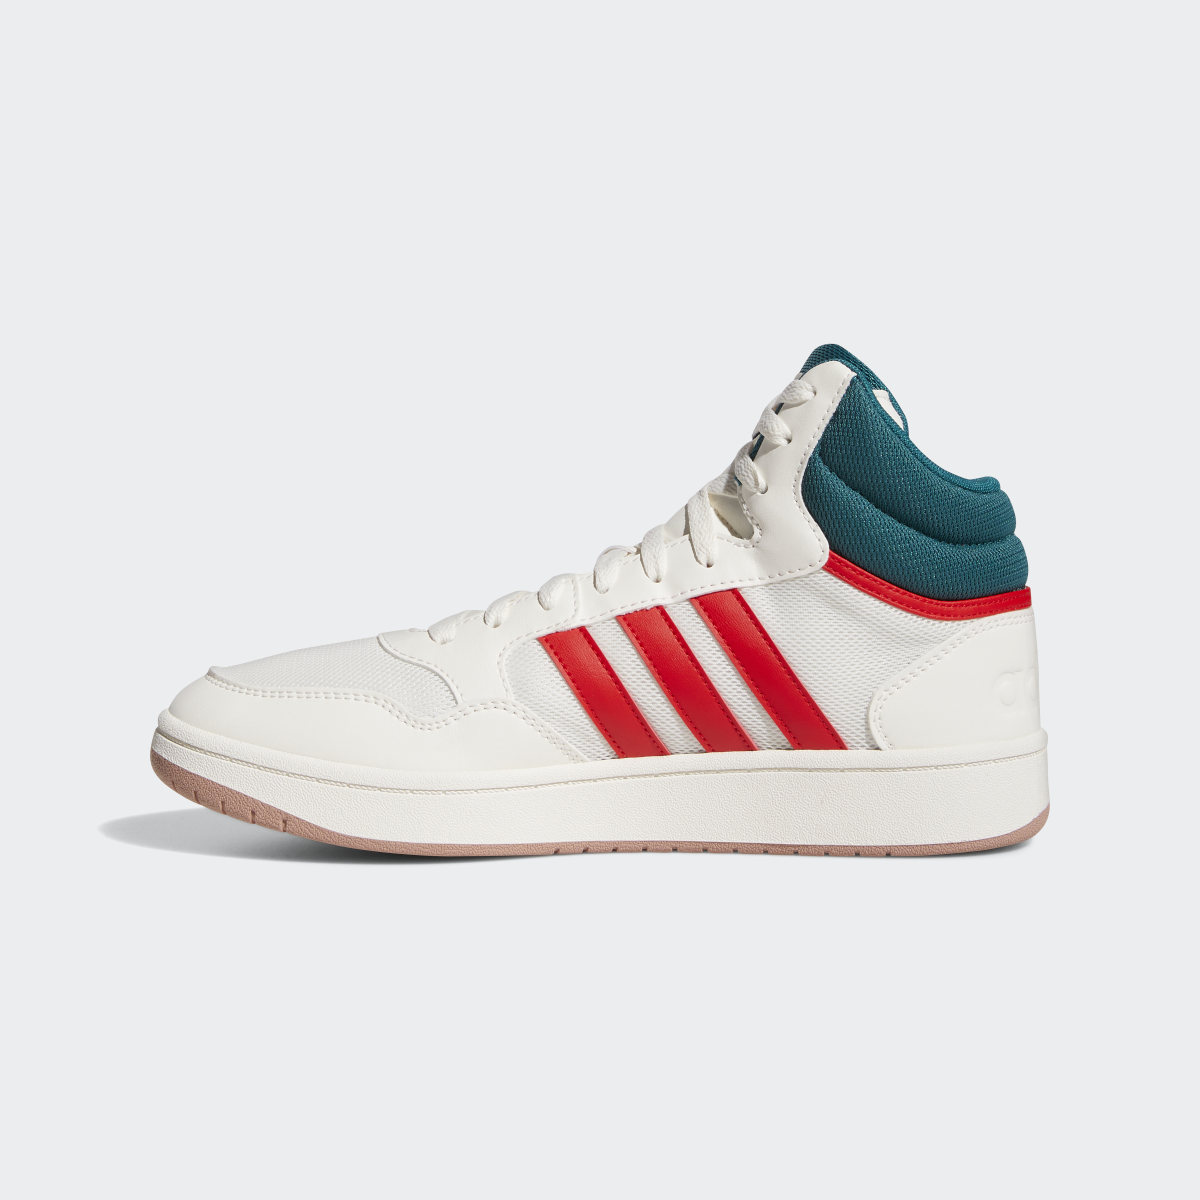 Adidas Hoops 3.0 Mid Shoes. 7